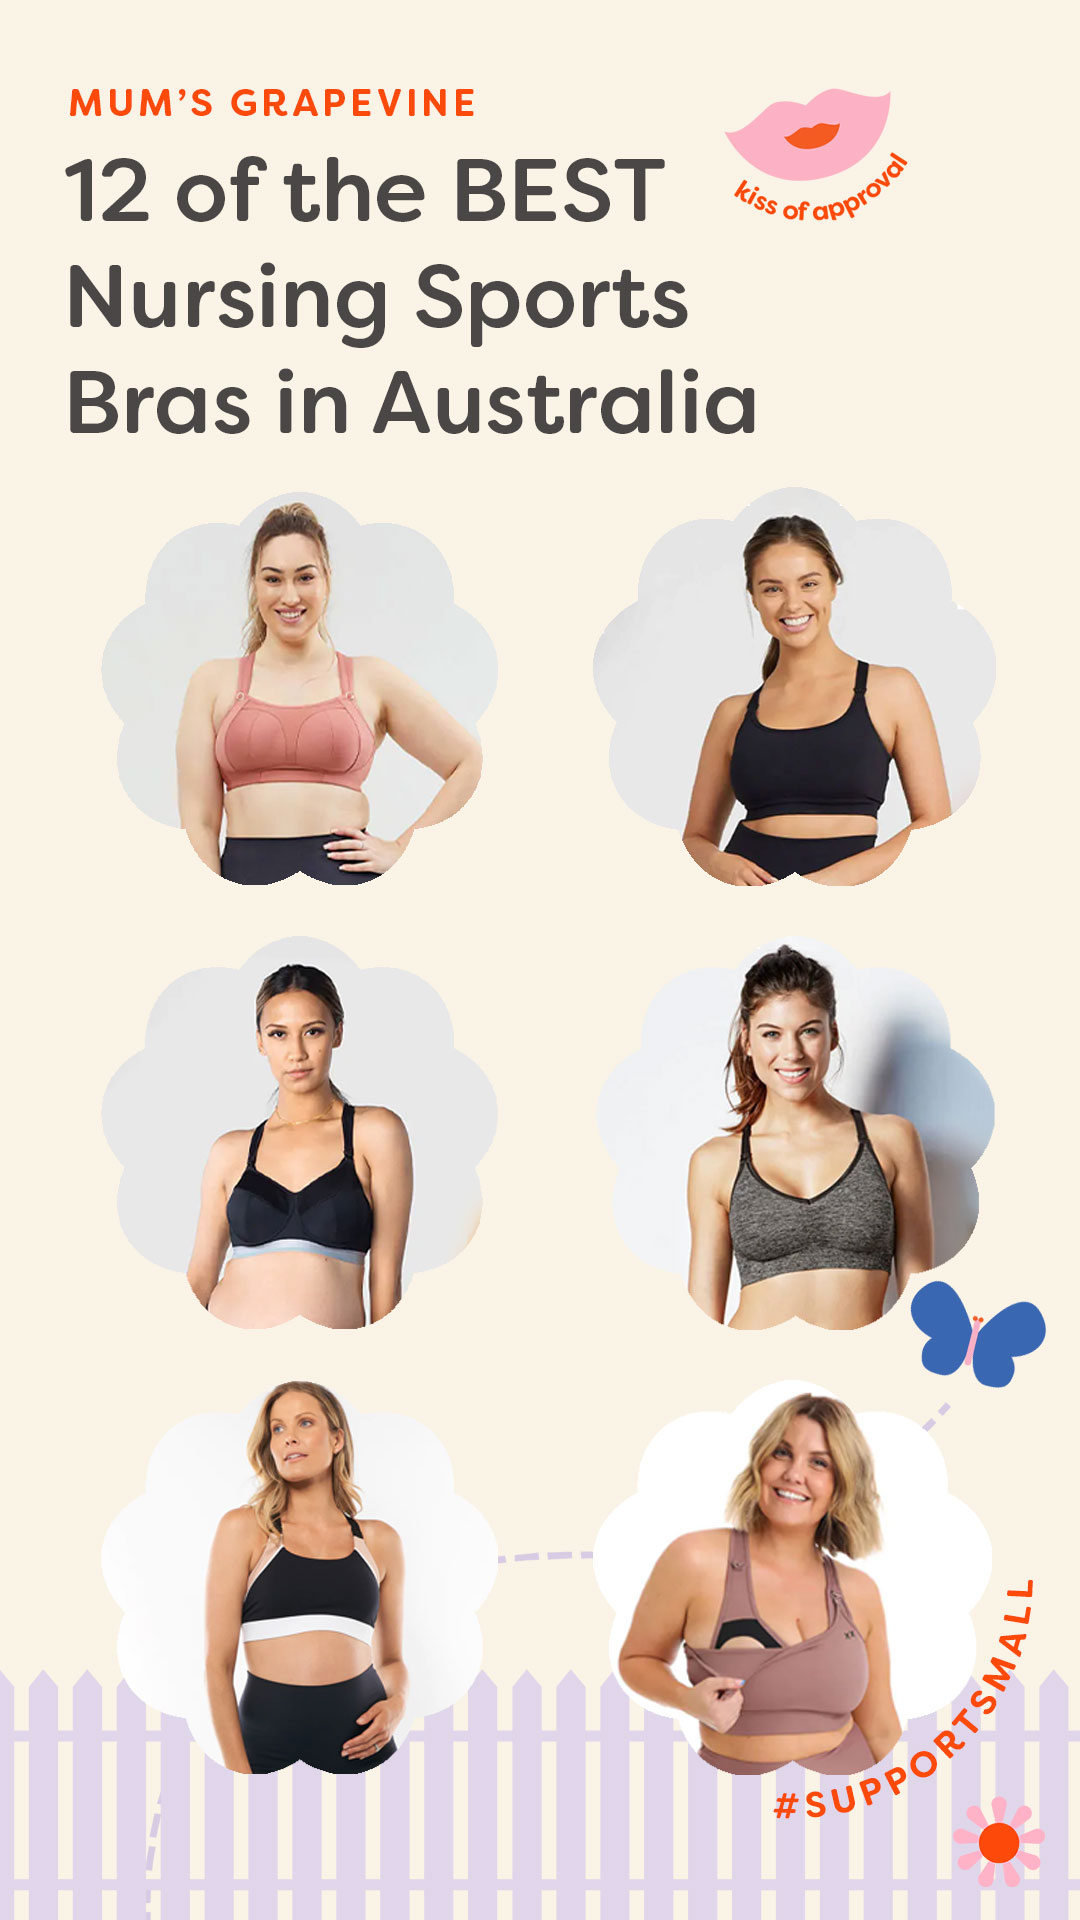 Your favourite Nursing Sports Bras are now $50 - Kiss Active